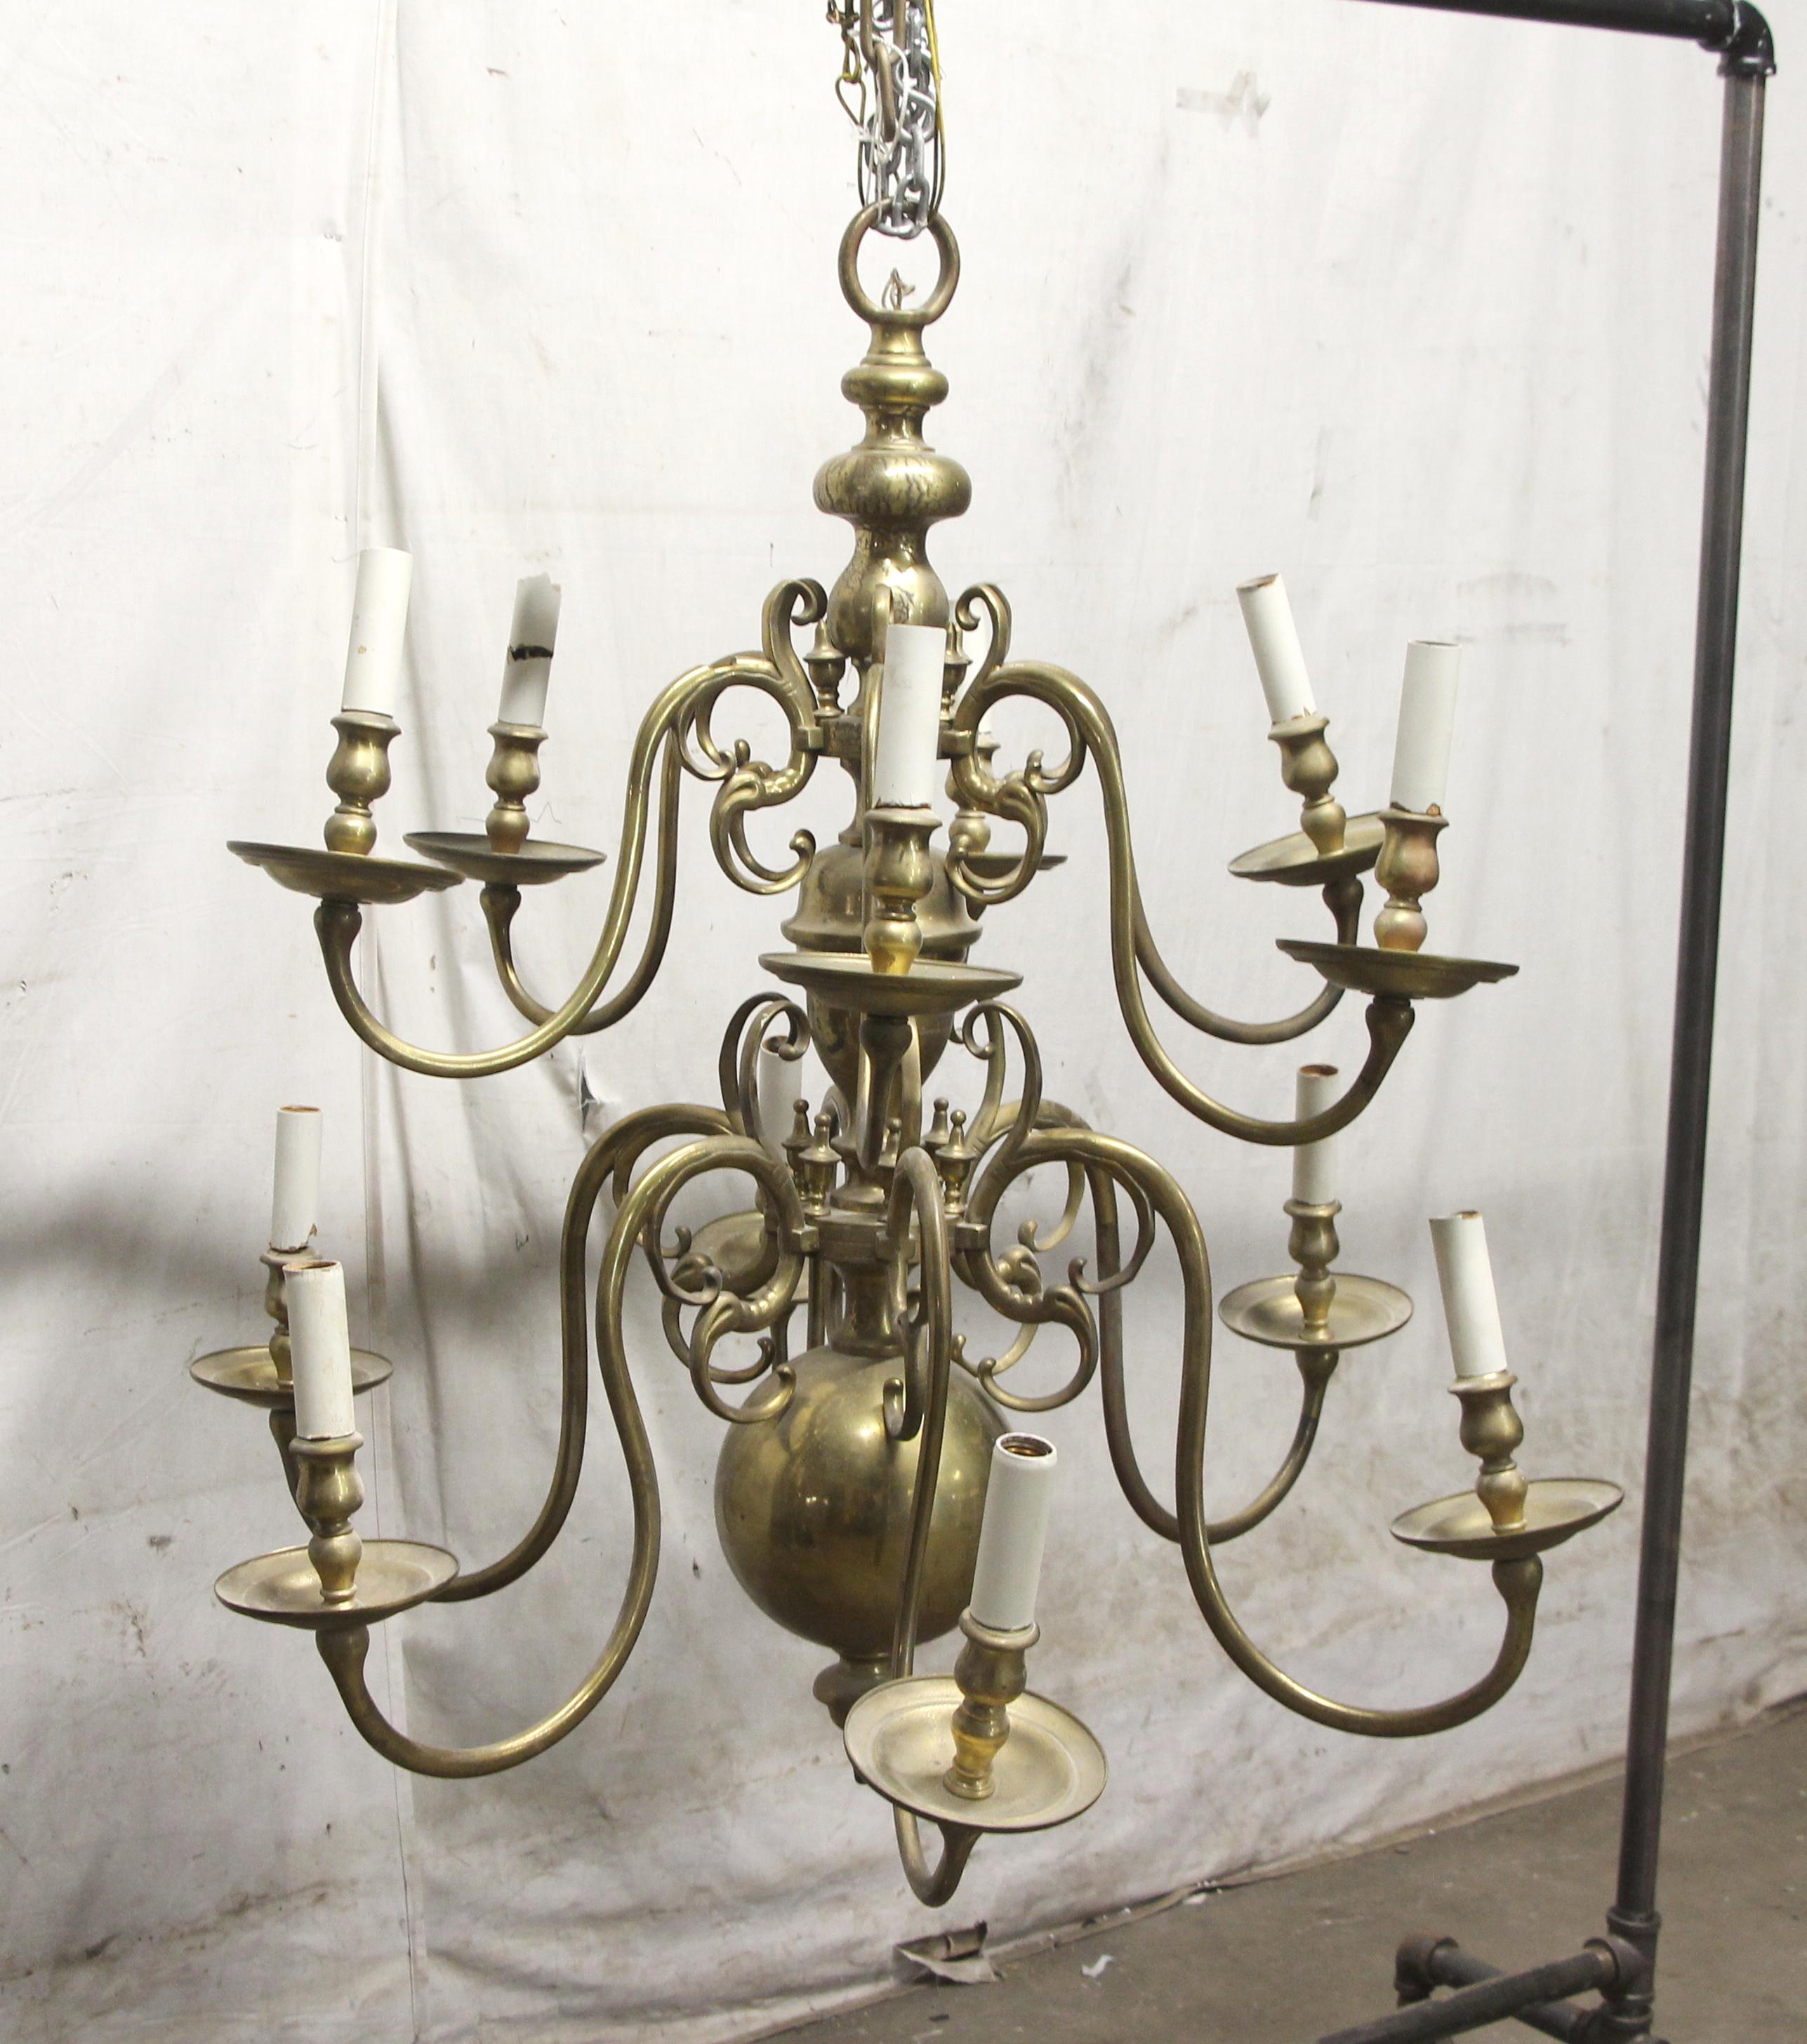 Original cast brass Williamsburg chandelier, circa 1910. It has a warm patina, but can be polished to shiny brass if desired. Price includes rewiring, cleaning without removing the original patina and adjusting the position of the arms. This can be